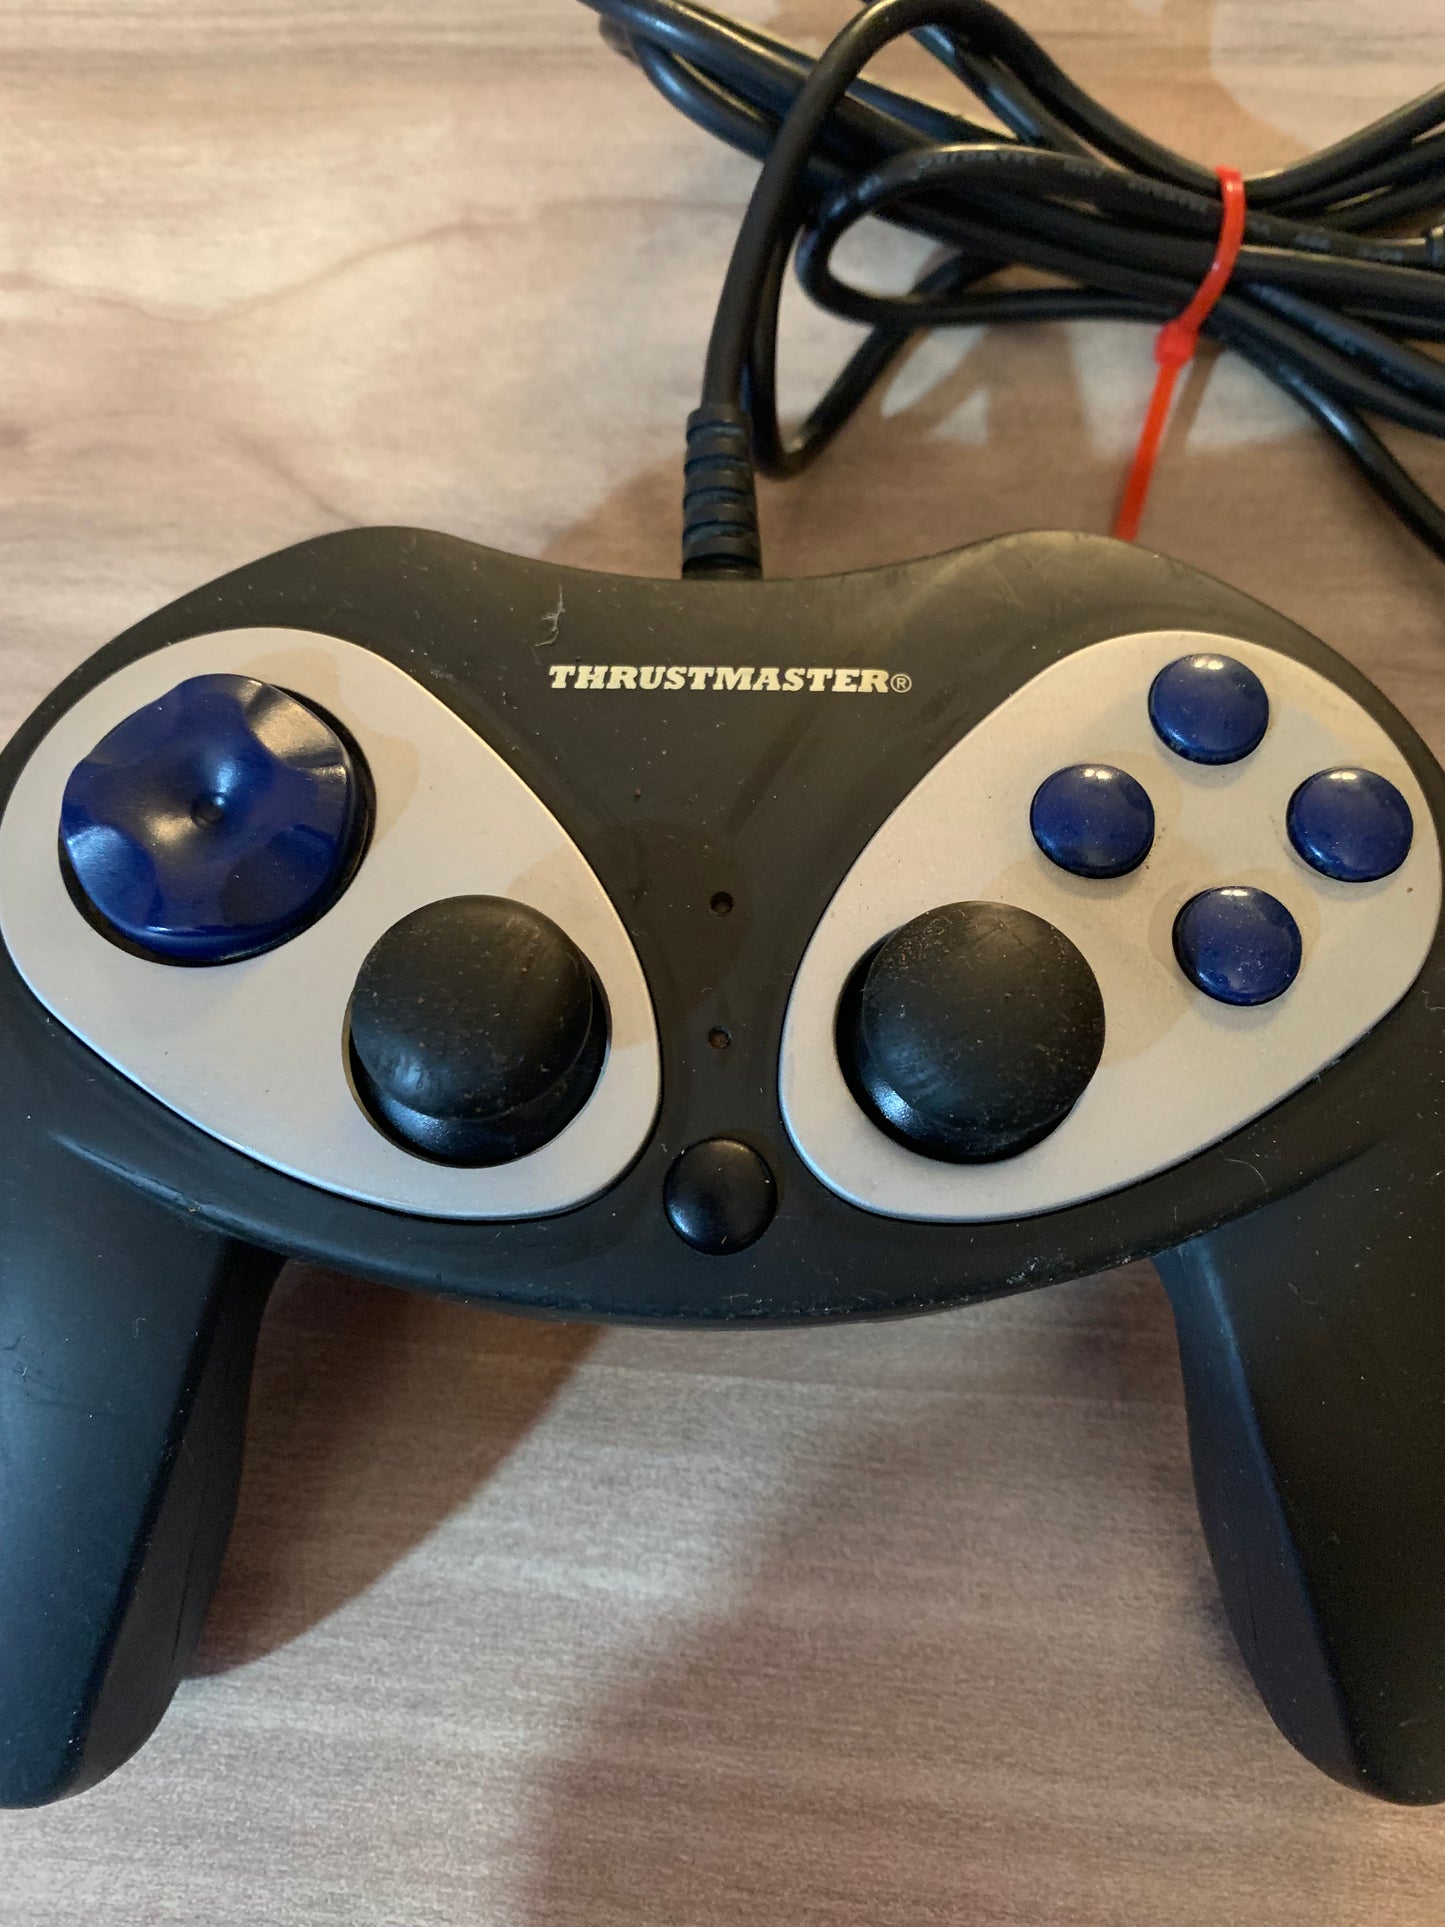 PC COMPUTER MANETTE | USB THRUSTMASTER CONTROLLER